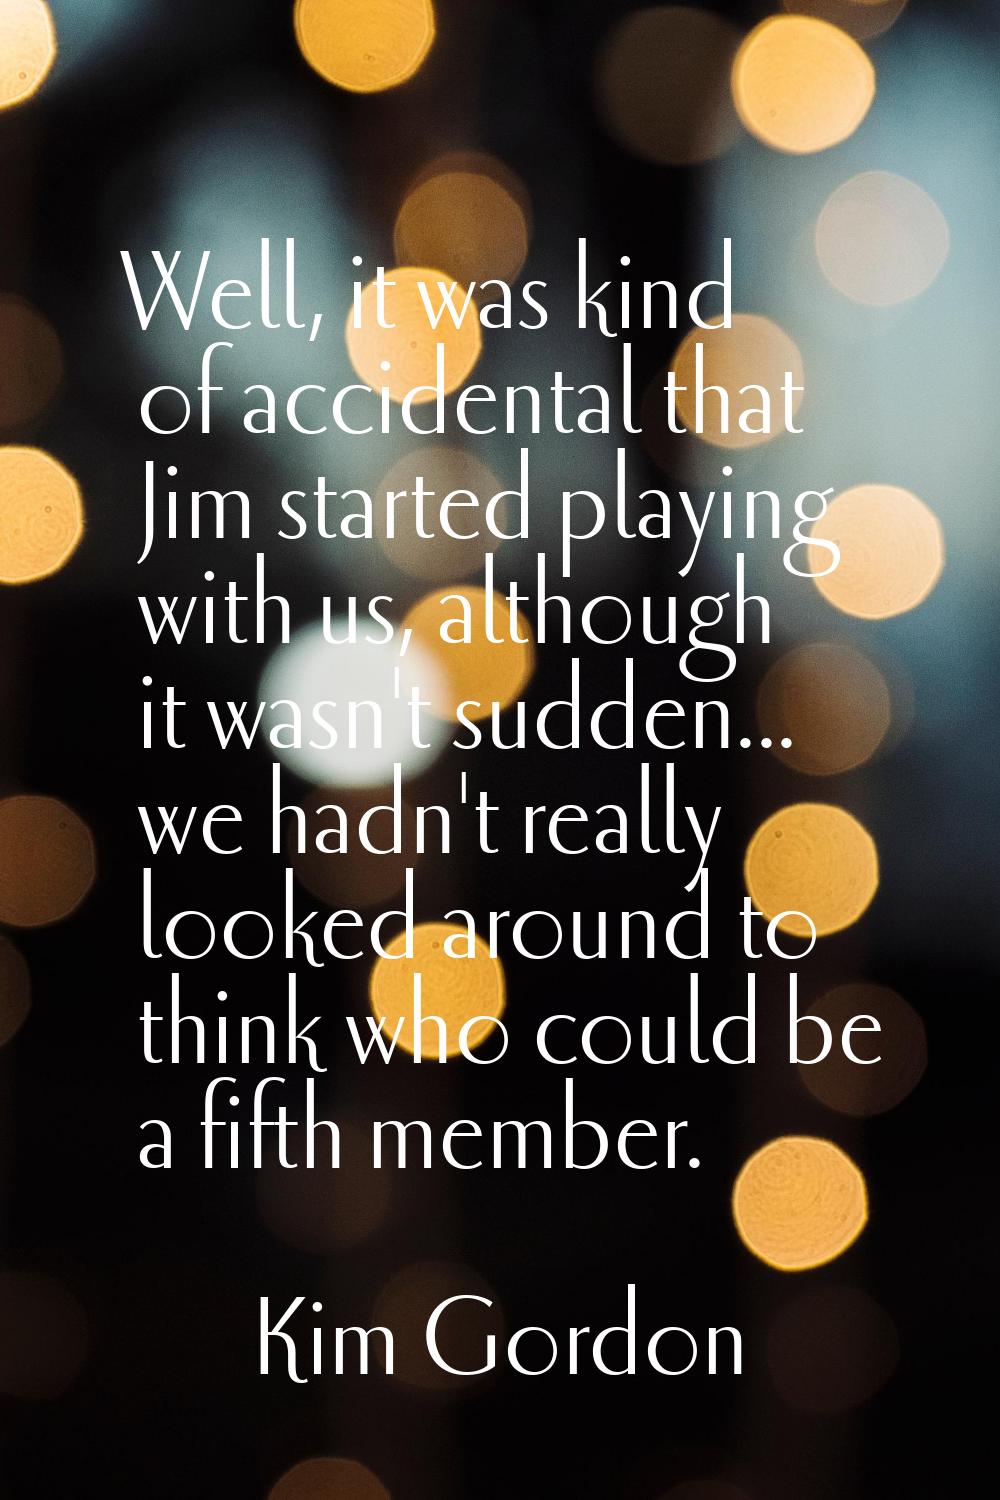 Well, it was kind of accidental that Jim started playing with us, although it wasn't sudden... we h